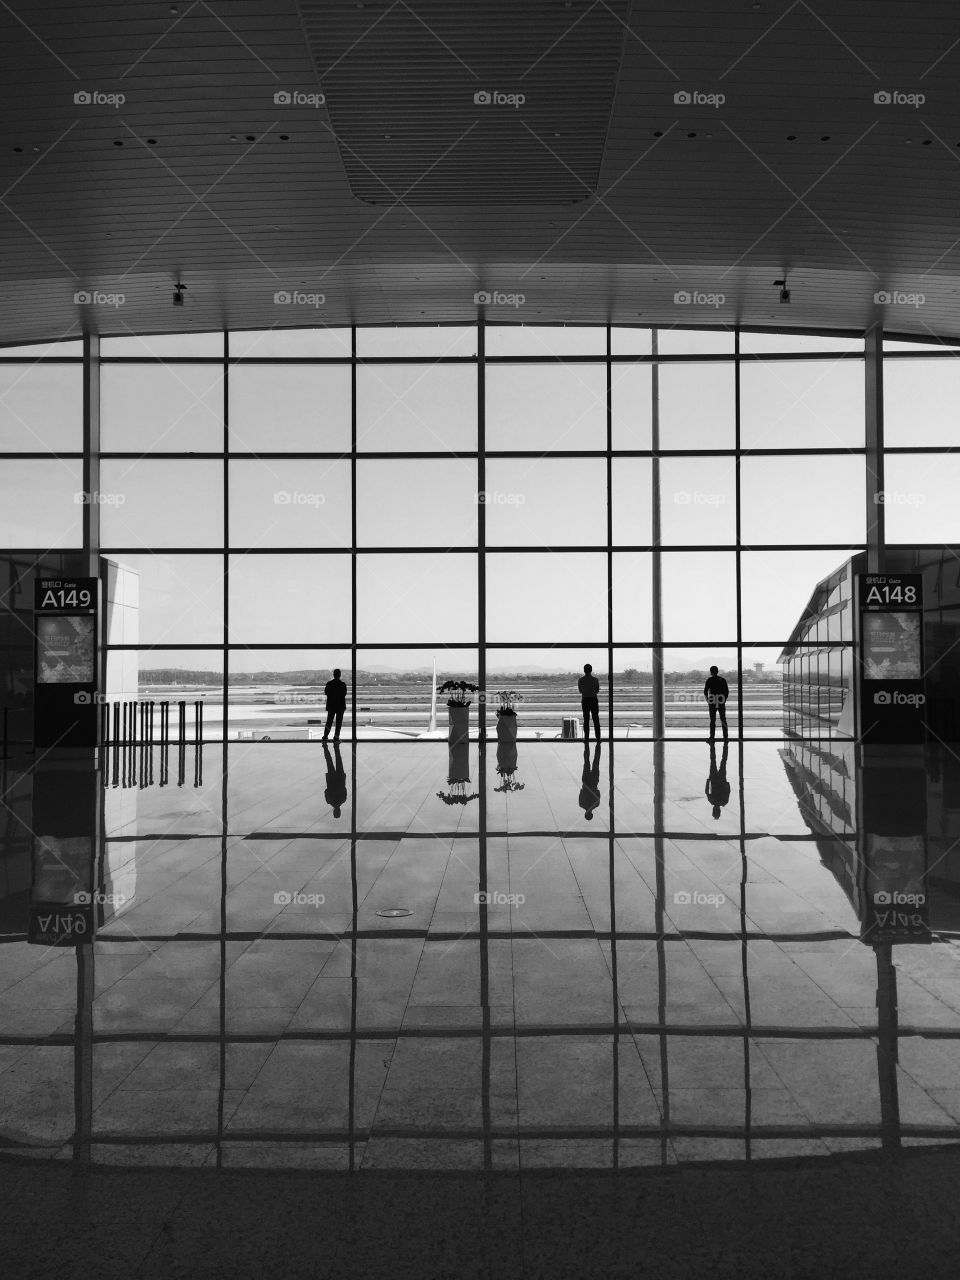 Boarding gate at the airport